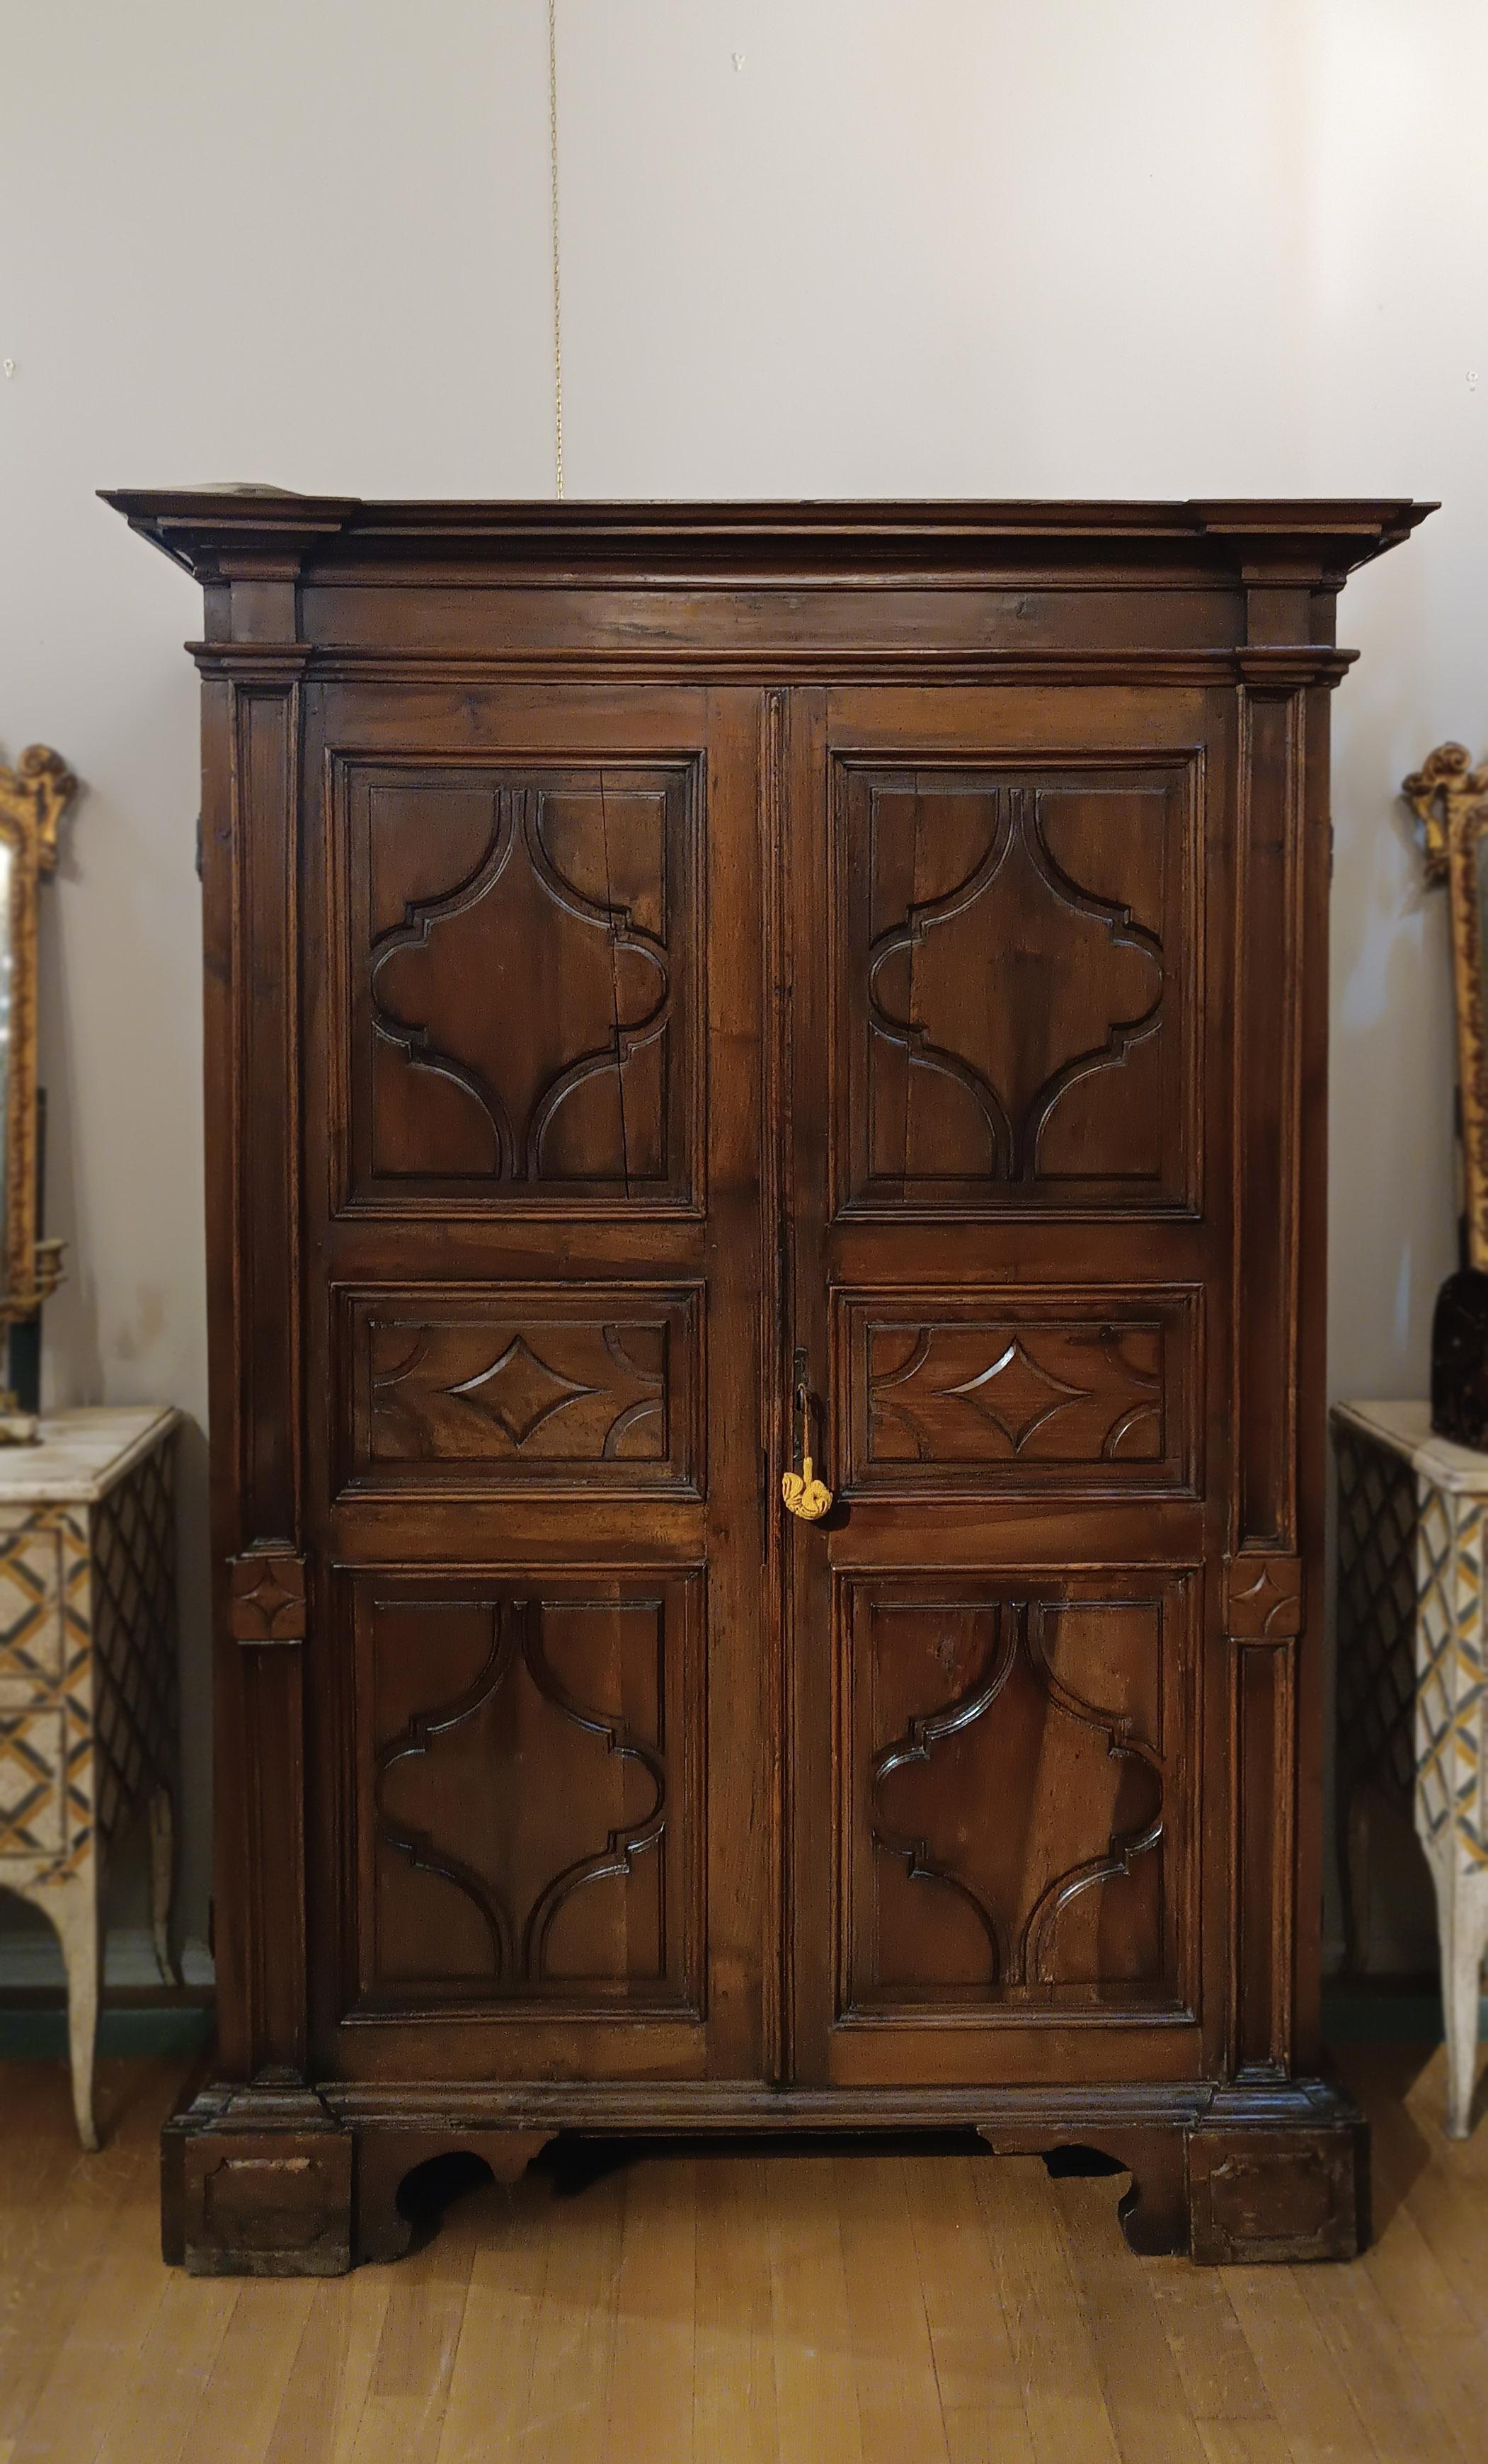 Beautiful wardrobe made entirely of solid walnut, with doors and sides finely carved with geometric tiles, which give an elegant and sophisticated decorative effect. The hat has a simple line, while the legs, rectangular but accurate in finish, give